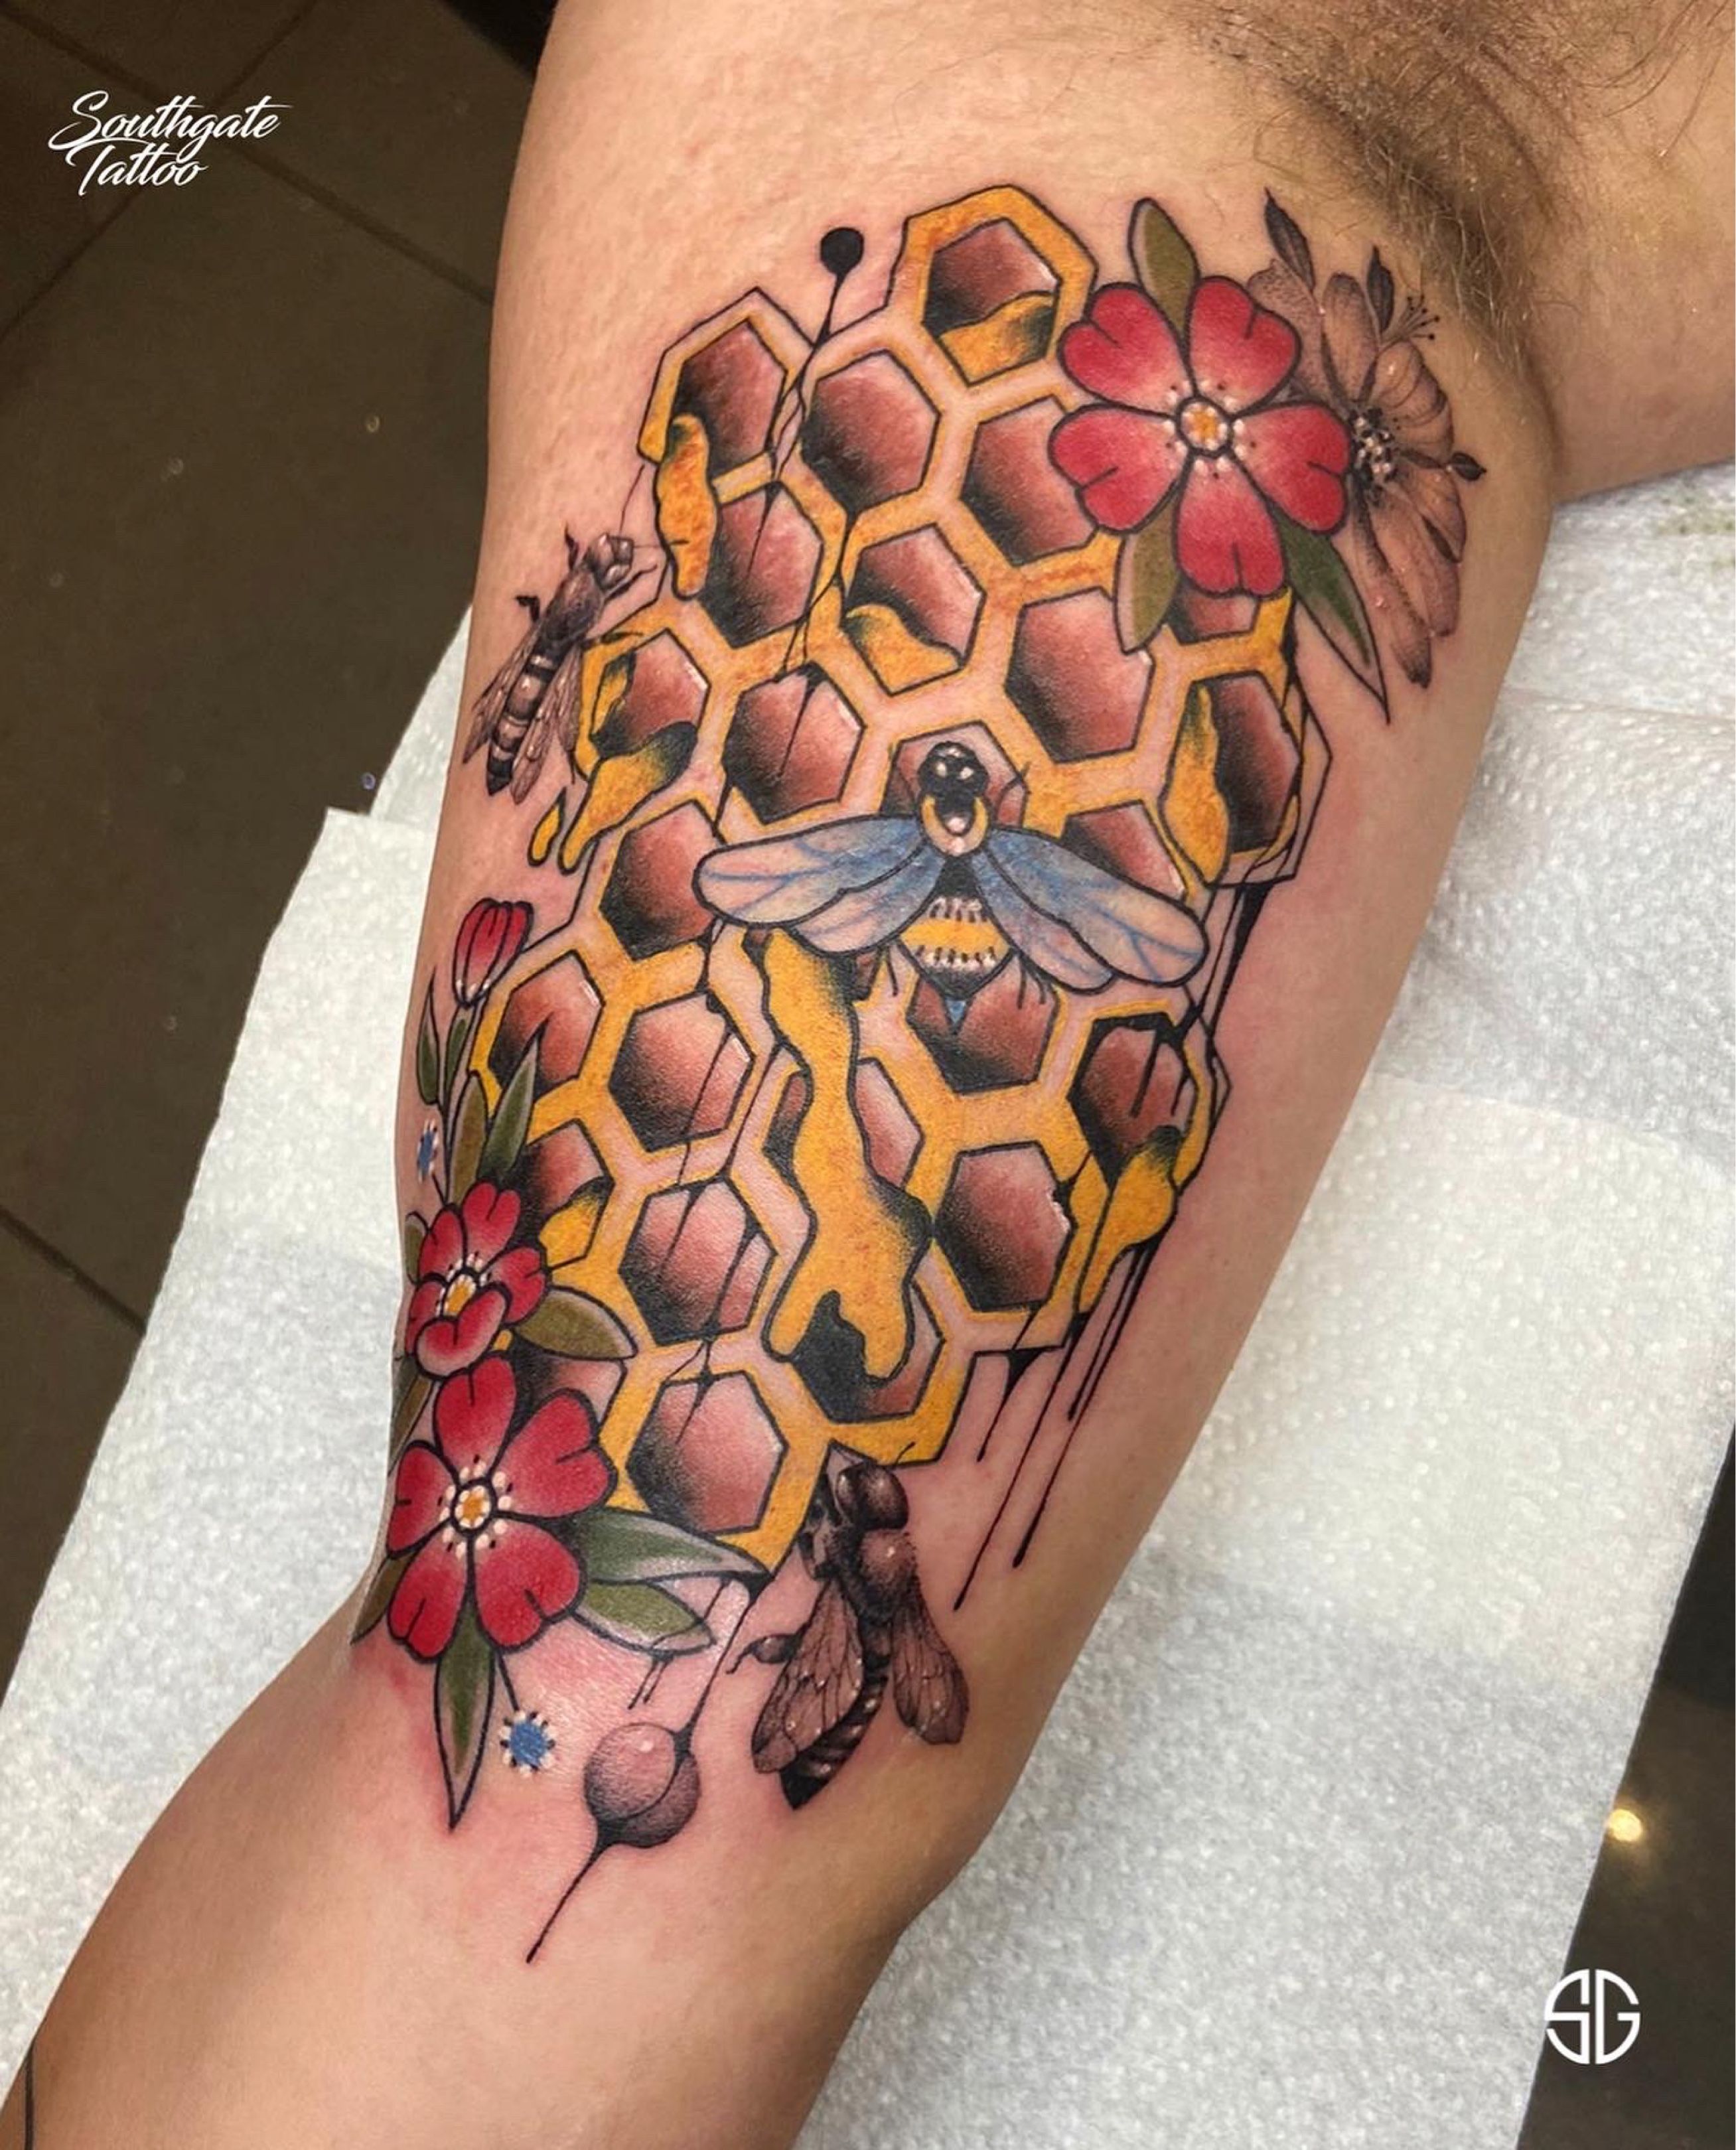 49 Unique Bee Tattoos with Meaning  Our Mindful Life